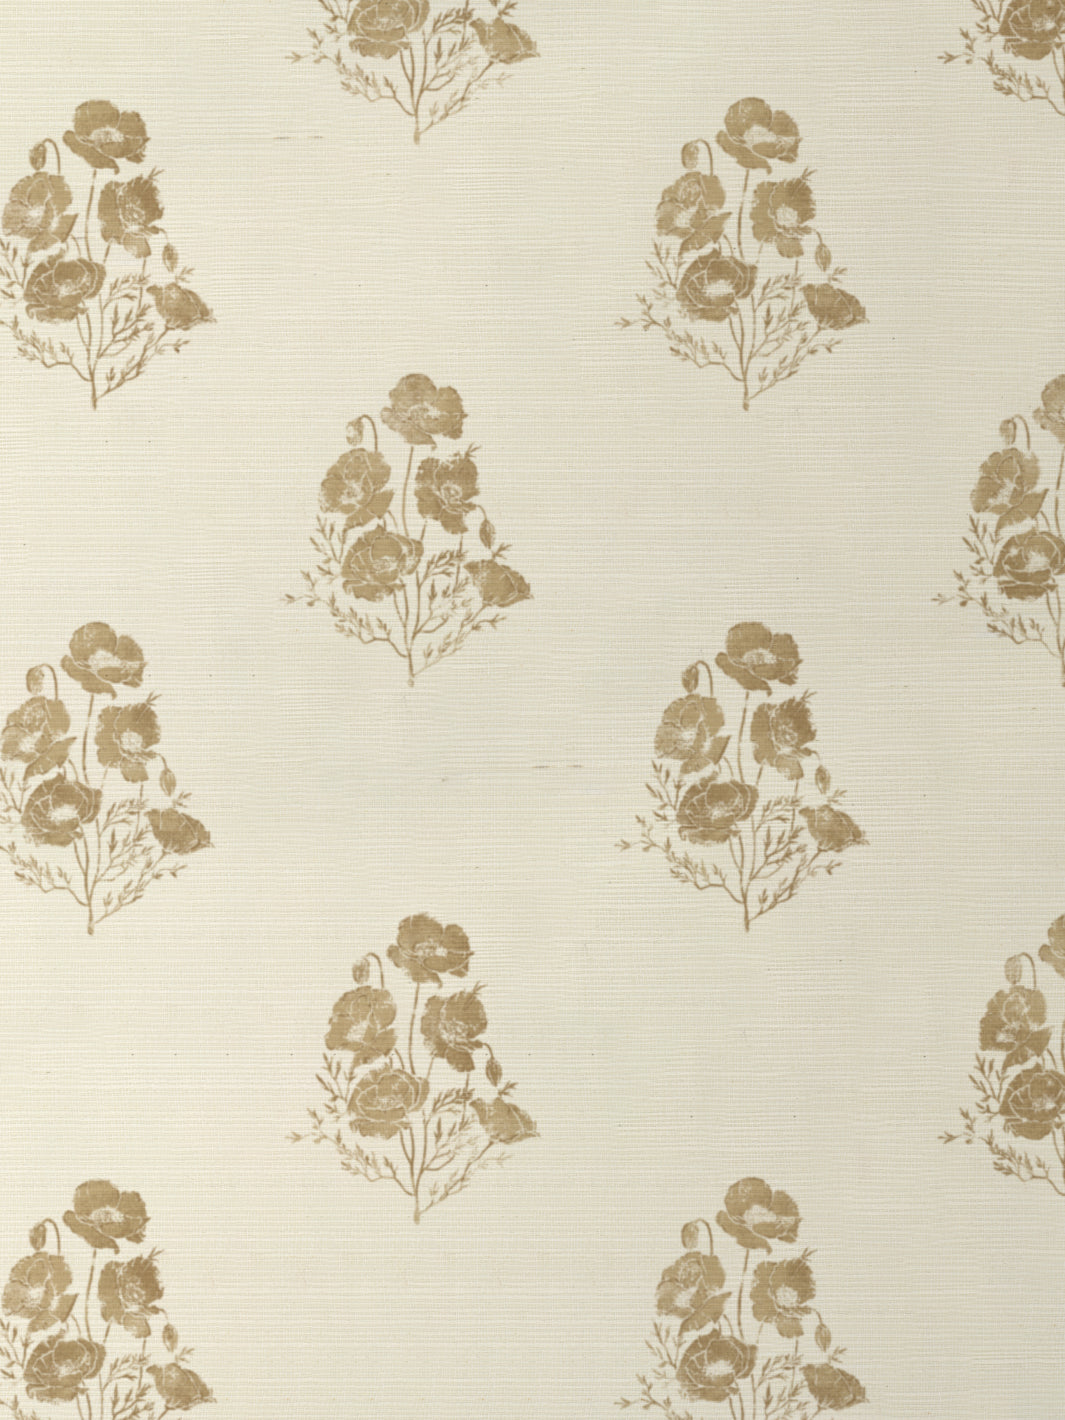 'California Poppy' Grasscloth Wallpaper by Nathan Turner - Gold